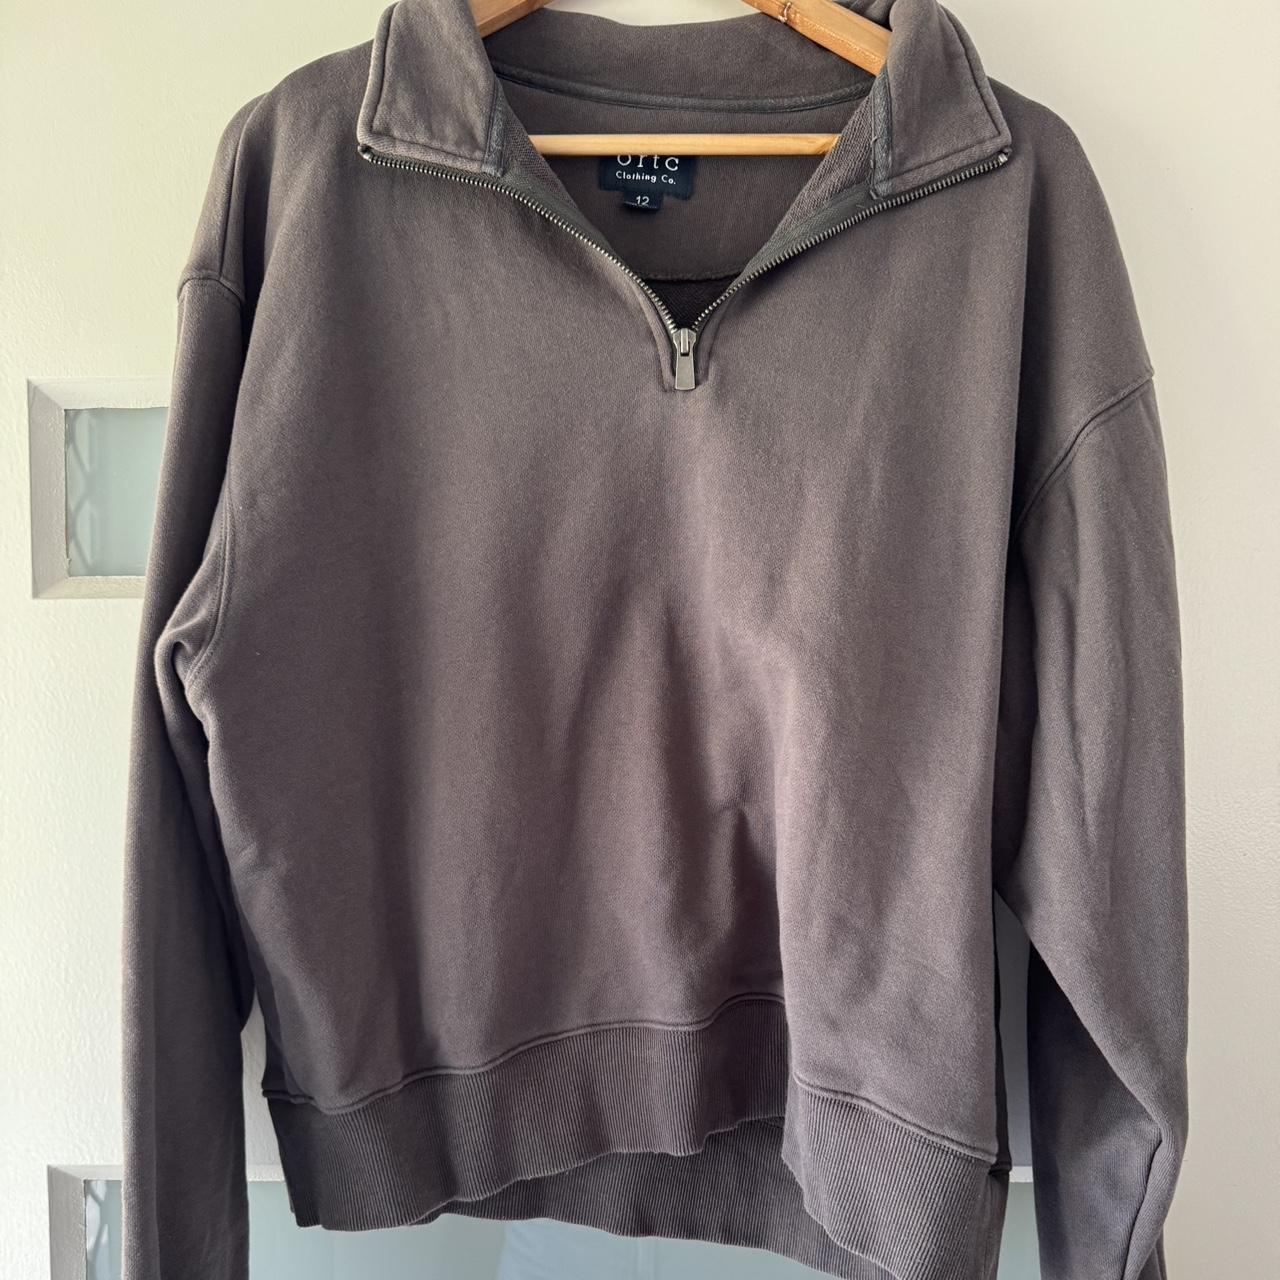 ORTC charcoal, worn once - Depop